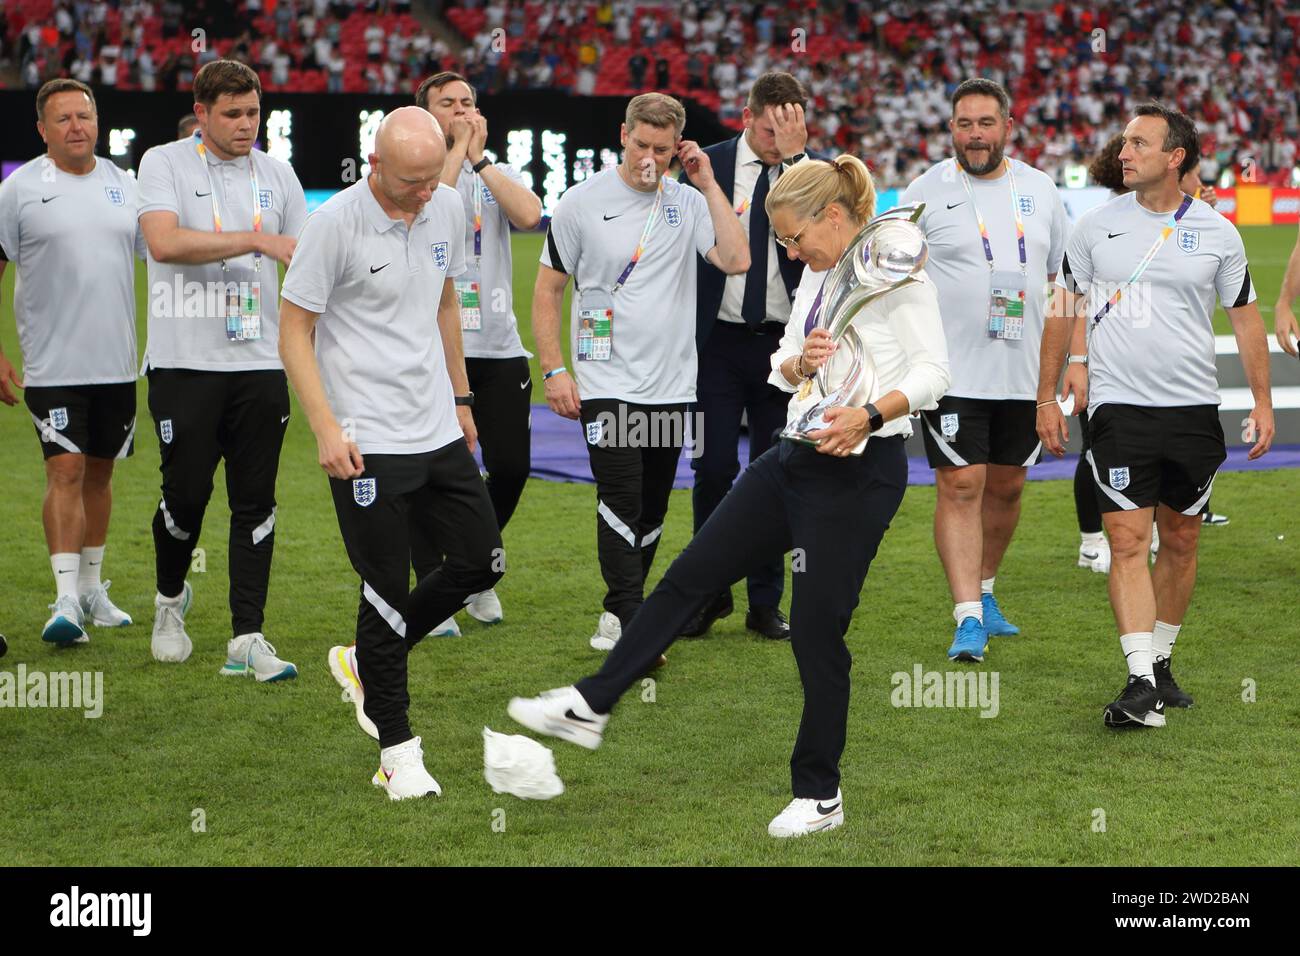 Sarina Wiegman, England manager and backroom staff with trophy UEFA Women's Euro Final 2022 England v Germany at Wembley Stadium, London 31 July 2022 Stock Photo